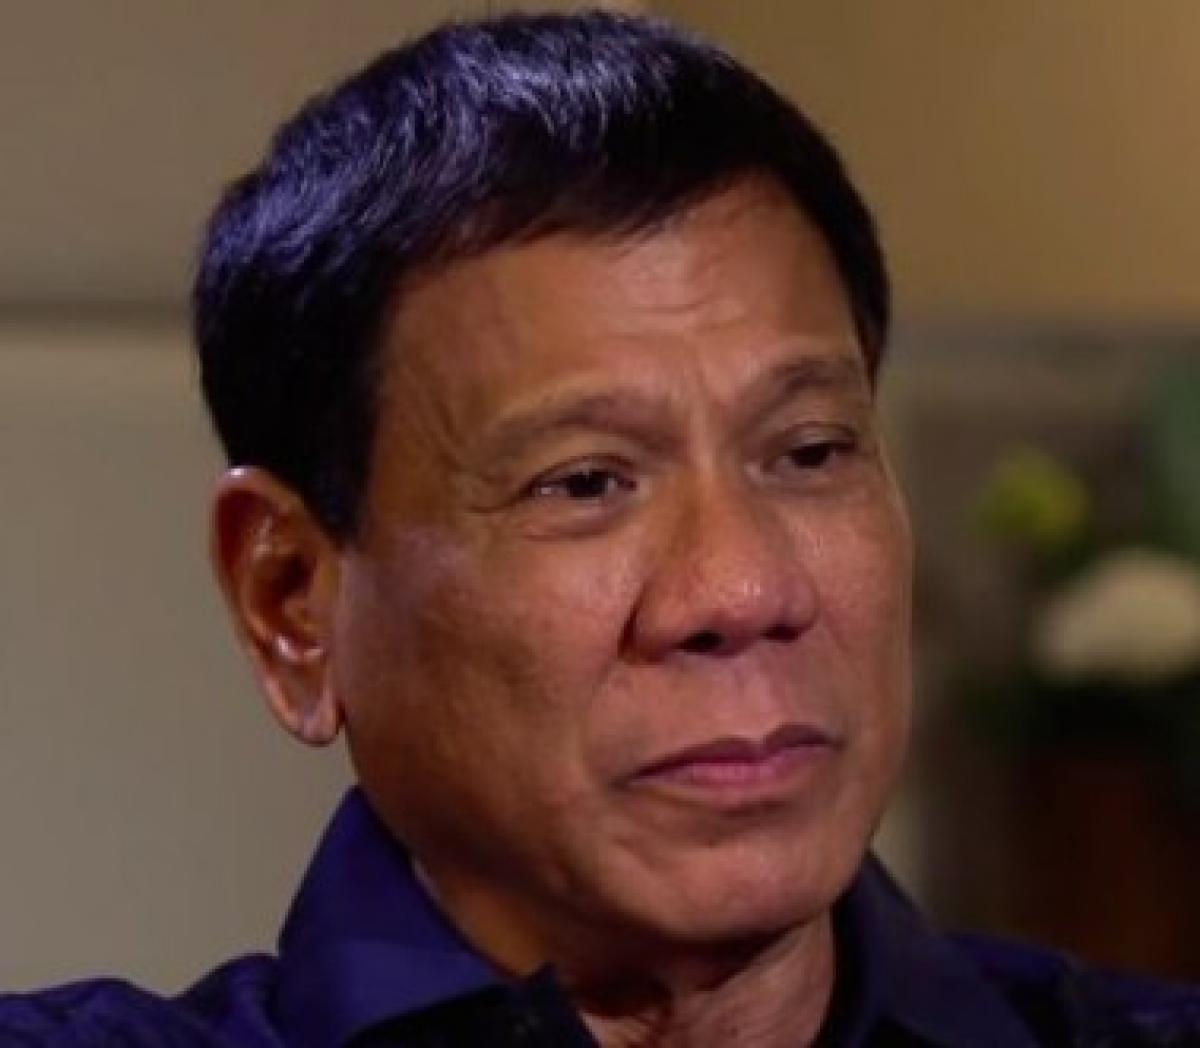 Philippines - Dirty Duterte Holds Lead in Opinion Polls